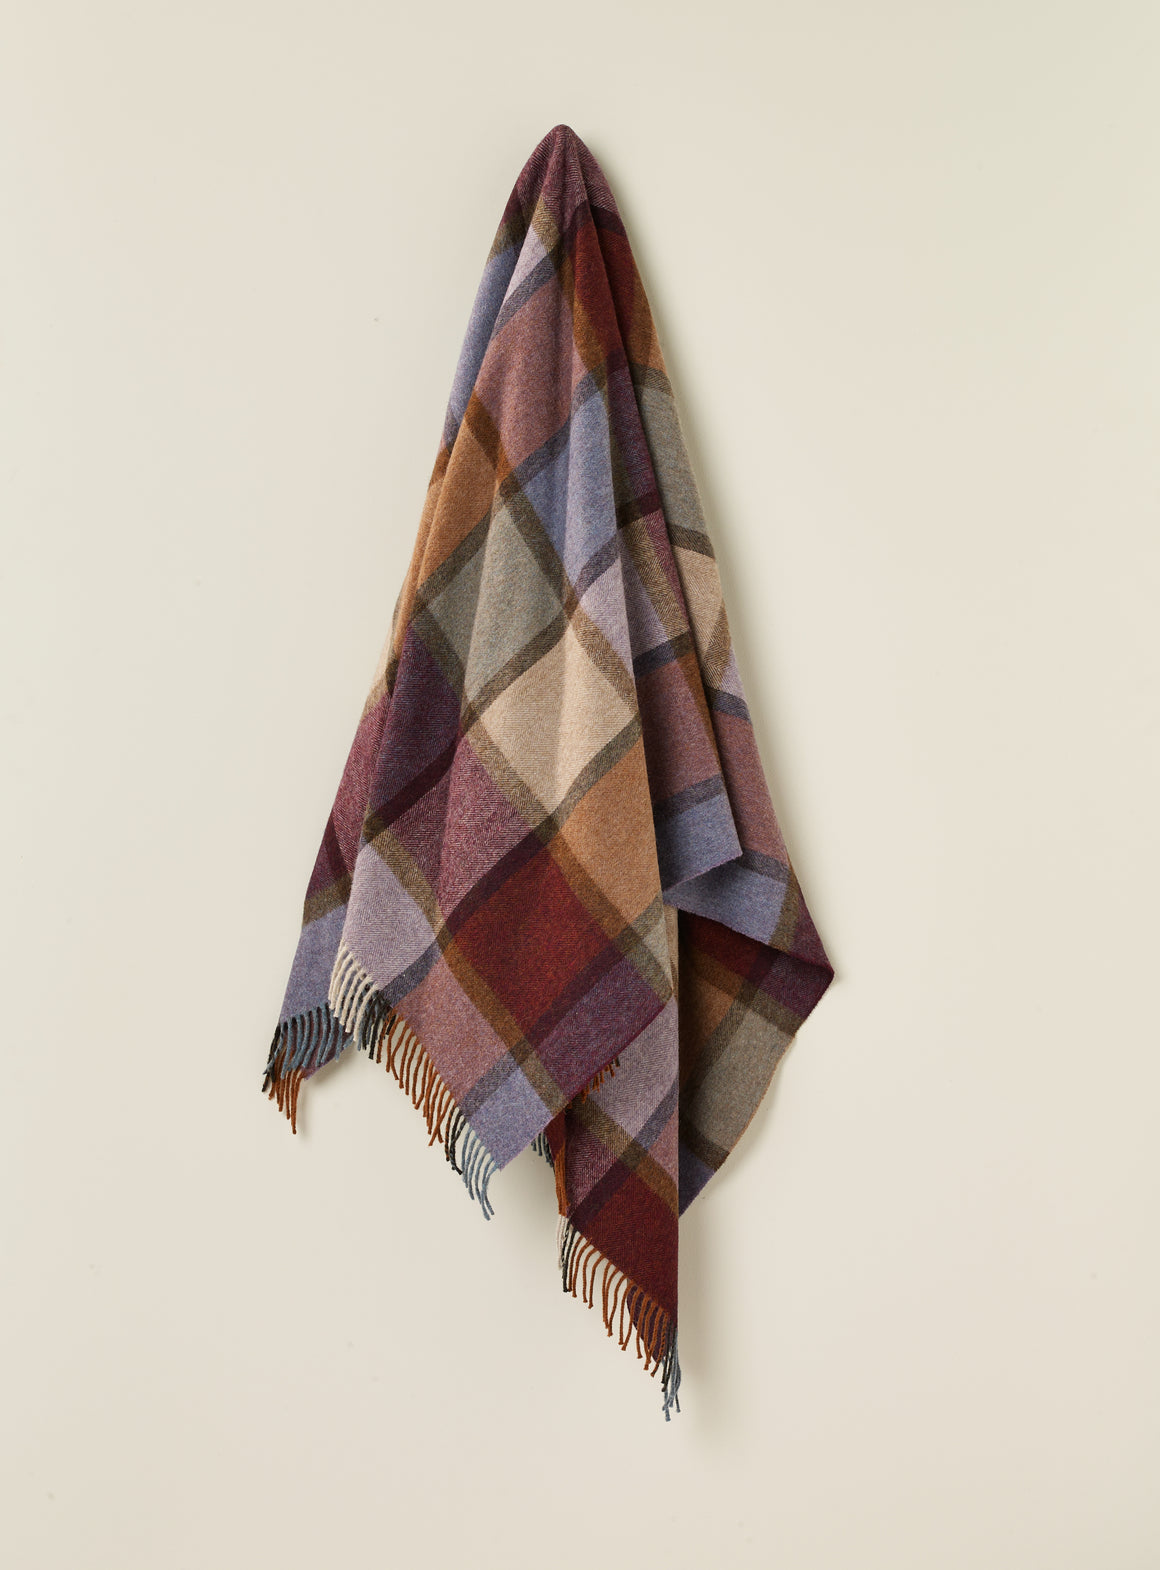 Merino Lambswool Throw Blanket - Pateley Damson Check, Made in England